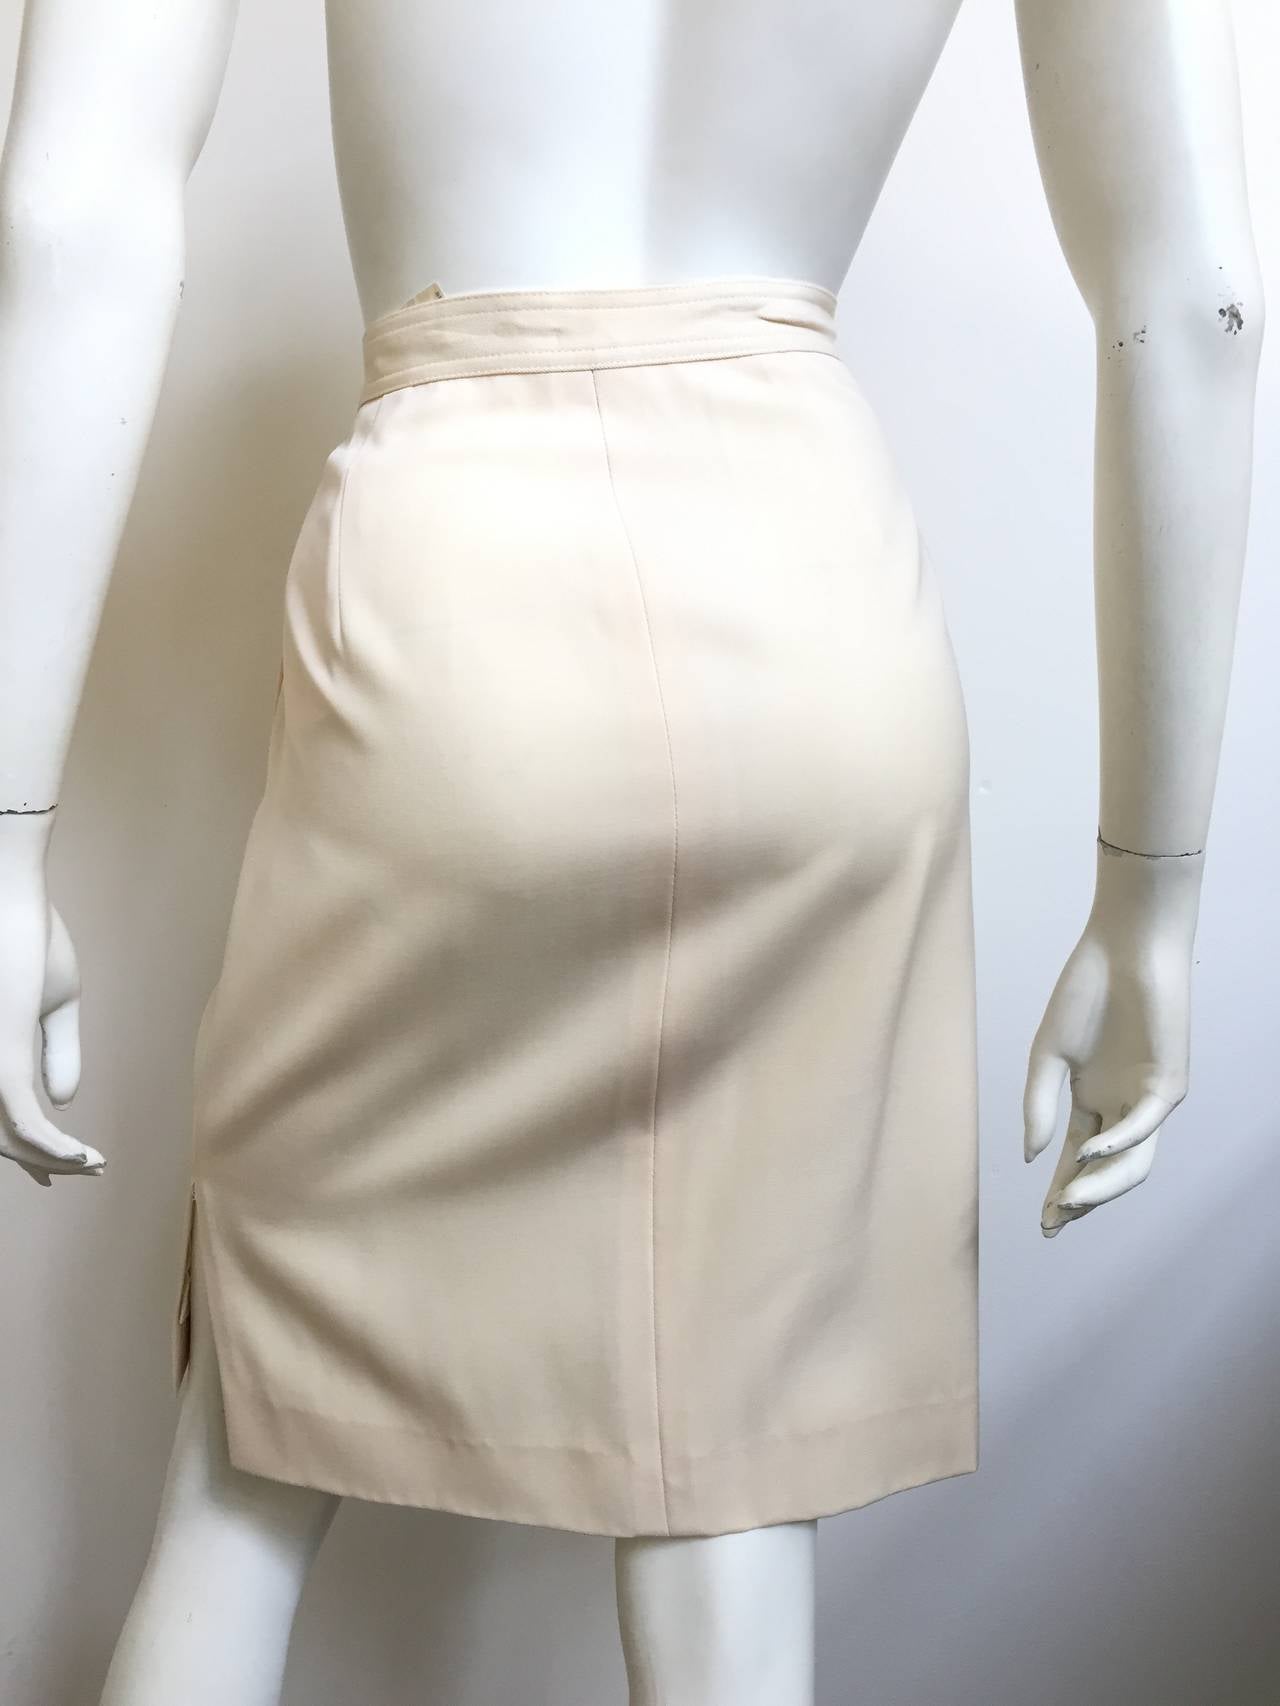 Valentino Cream Wool Skirt Size 6. For Sale at 1stdibs